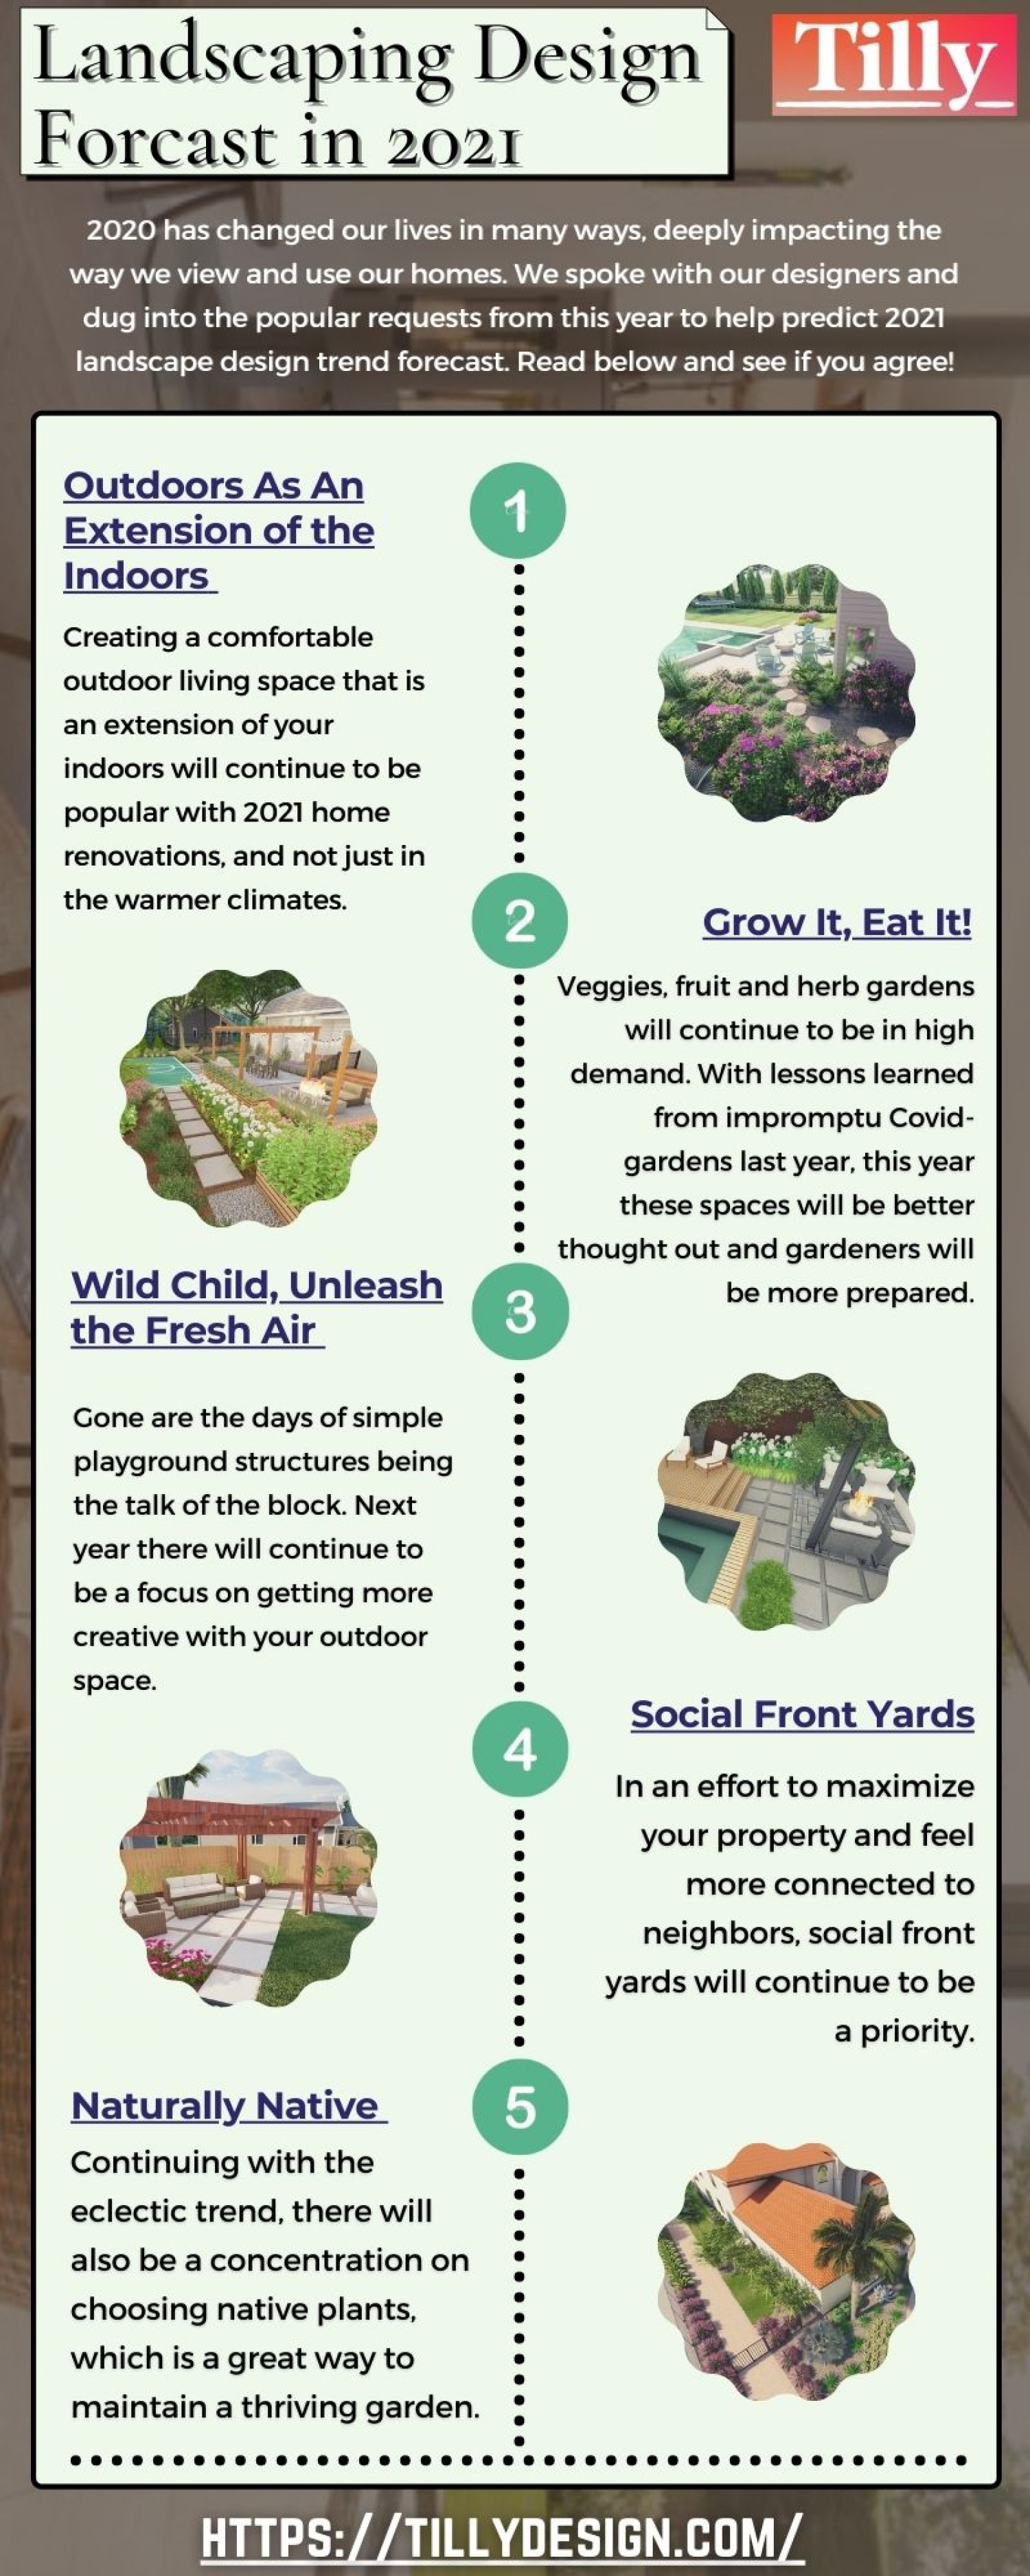 Online Landscape Designs that Will Be Trending In 2021 Infographic